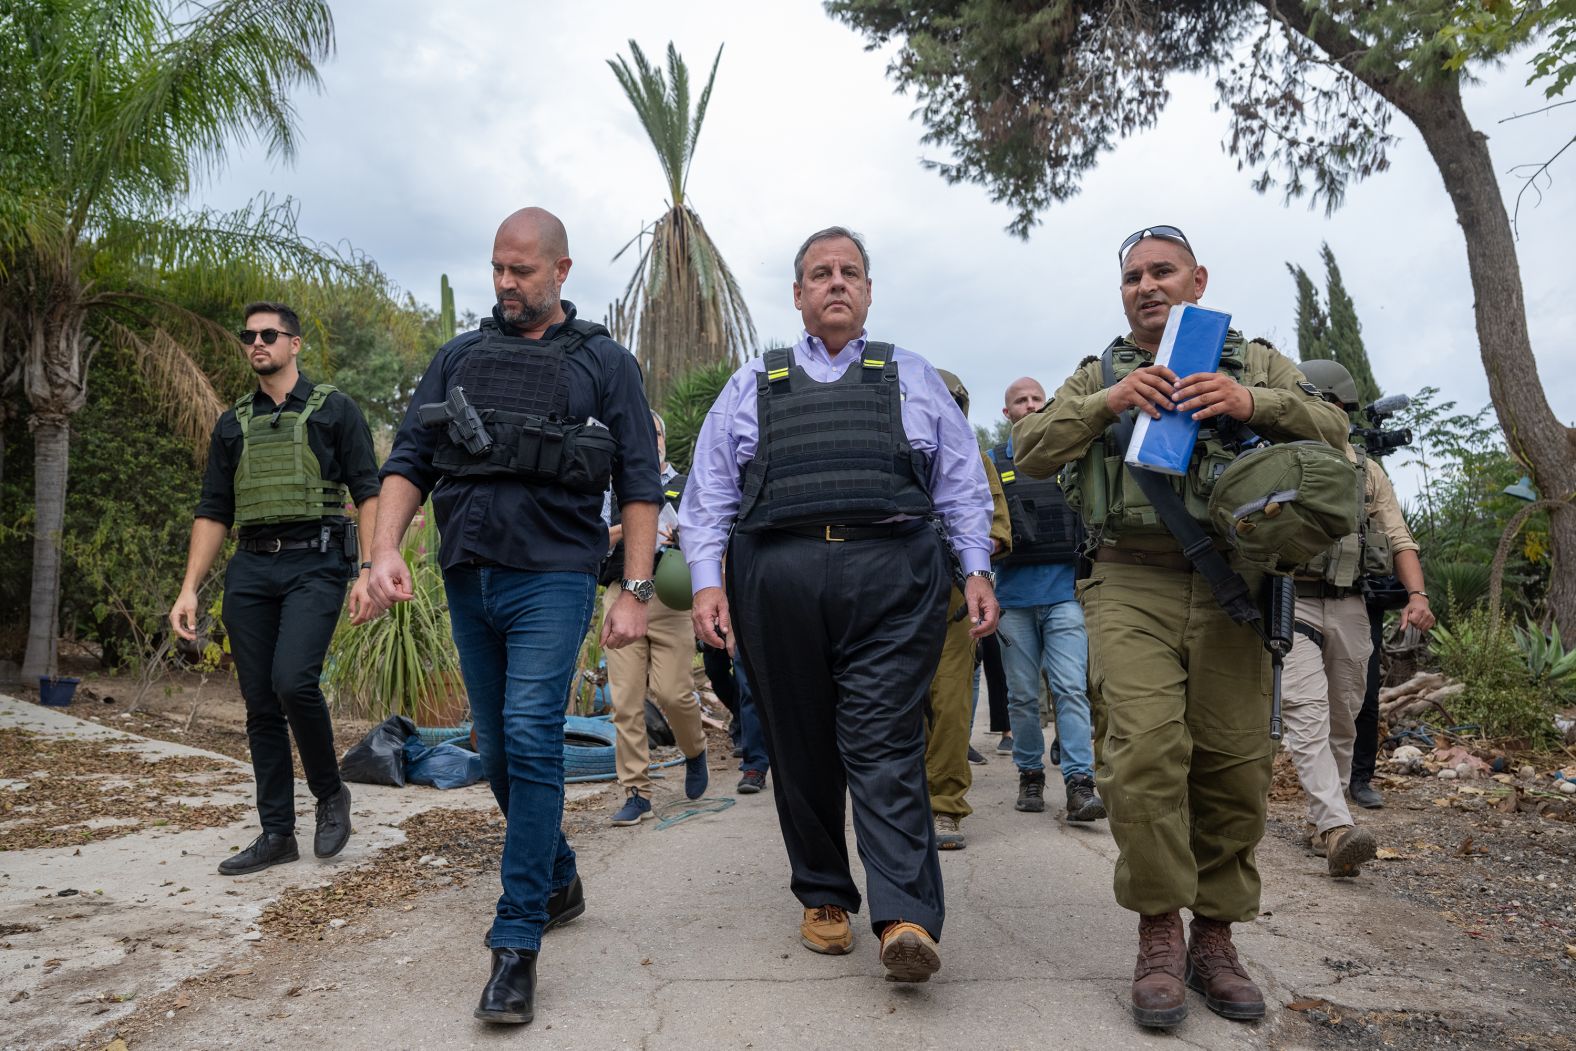 Christie visits Kfar Aza, Israel, in November 2023. He was the first <a href="index.php?page=&url=https%3A%2F%2Fwww.cnn.com%2F2023%2F11%2F12%2Fpolitics%2Fchris-christie-israel-visit-hamas-war%2Findex.html" target="_blank">Republican presidential candidate to visit the country</a> following the October 7 Hamas attacks. 